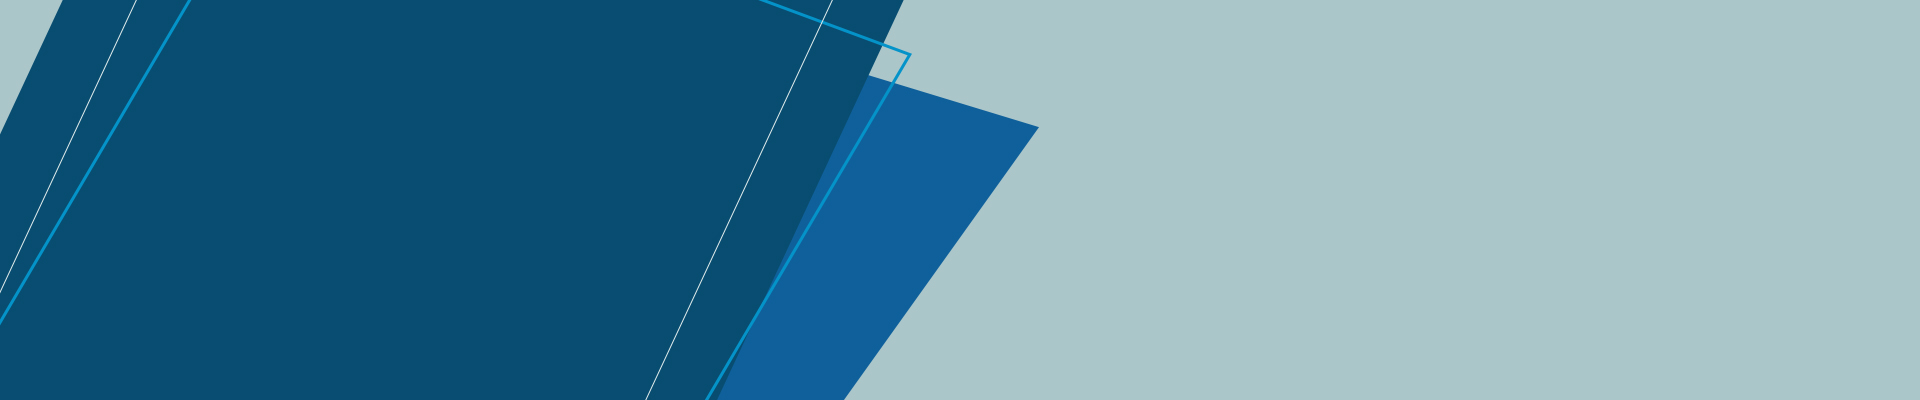 RevGen Partners header image with navy and blue rectangles